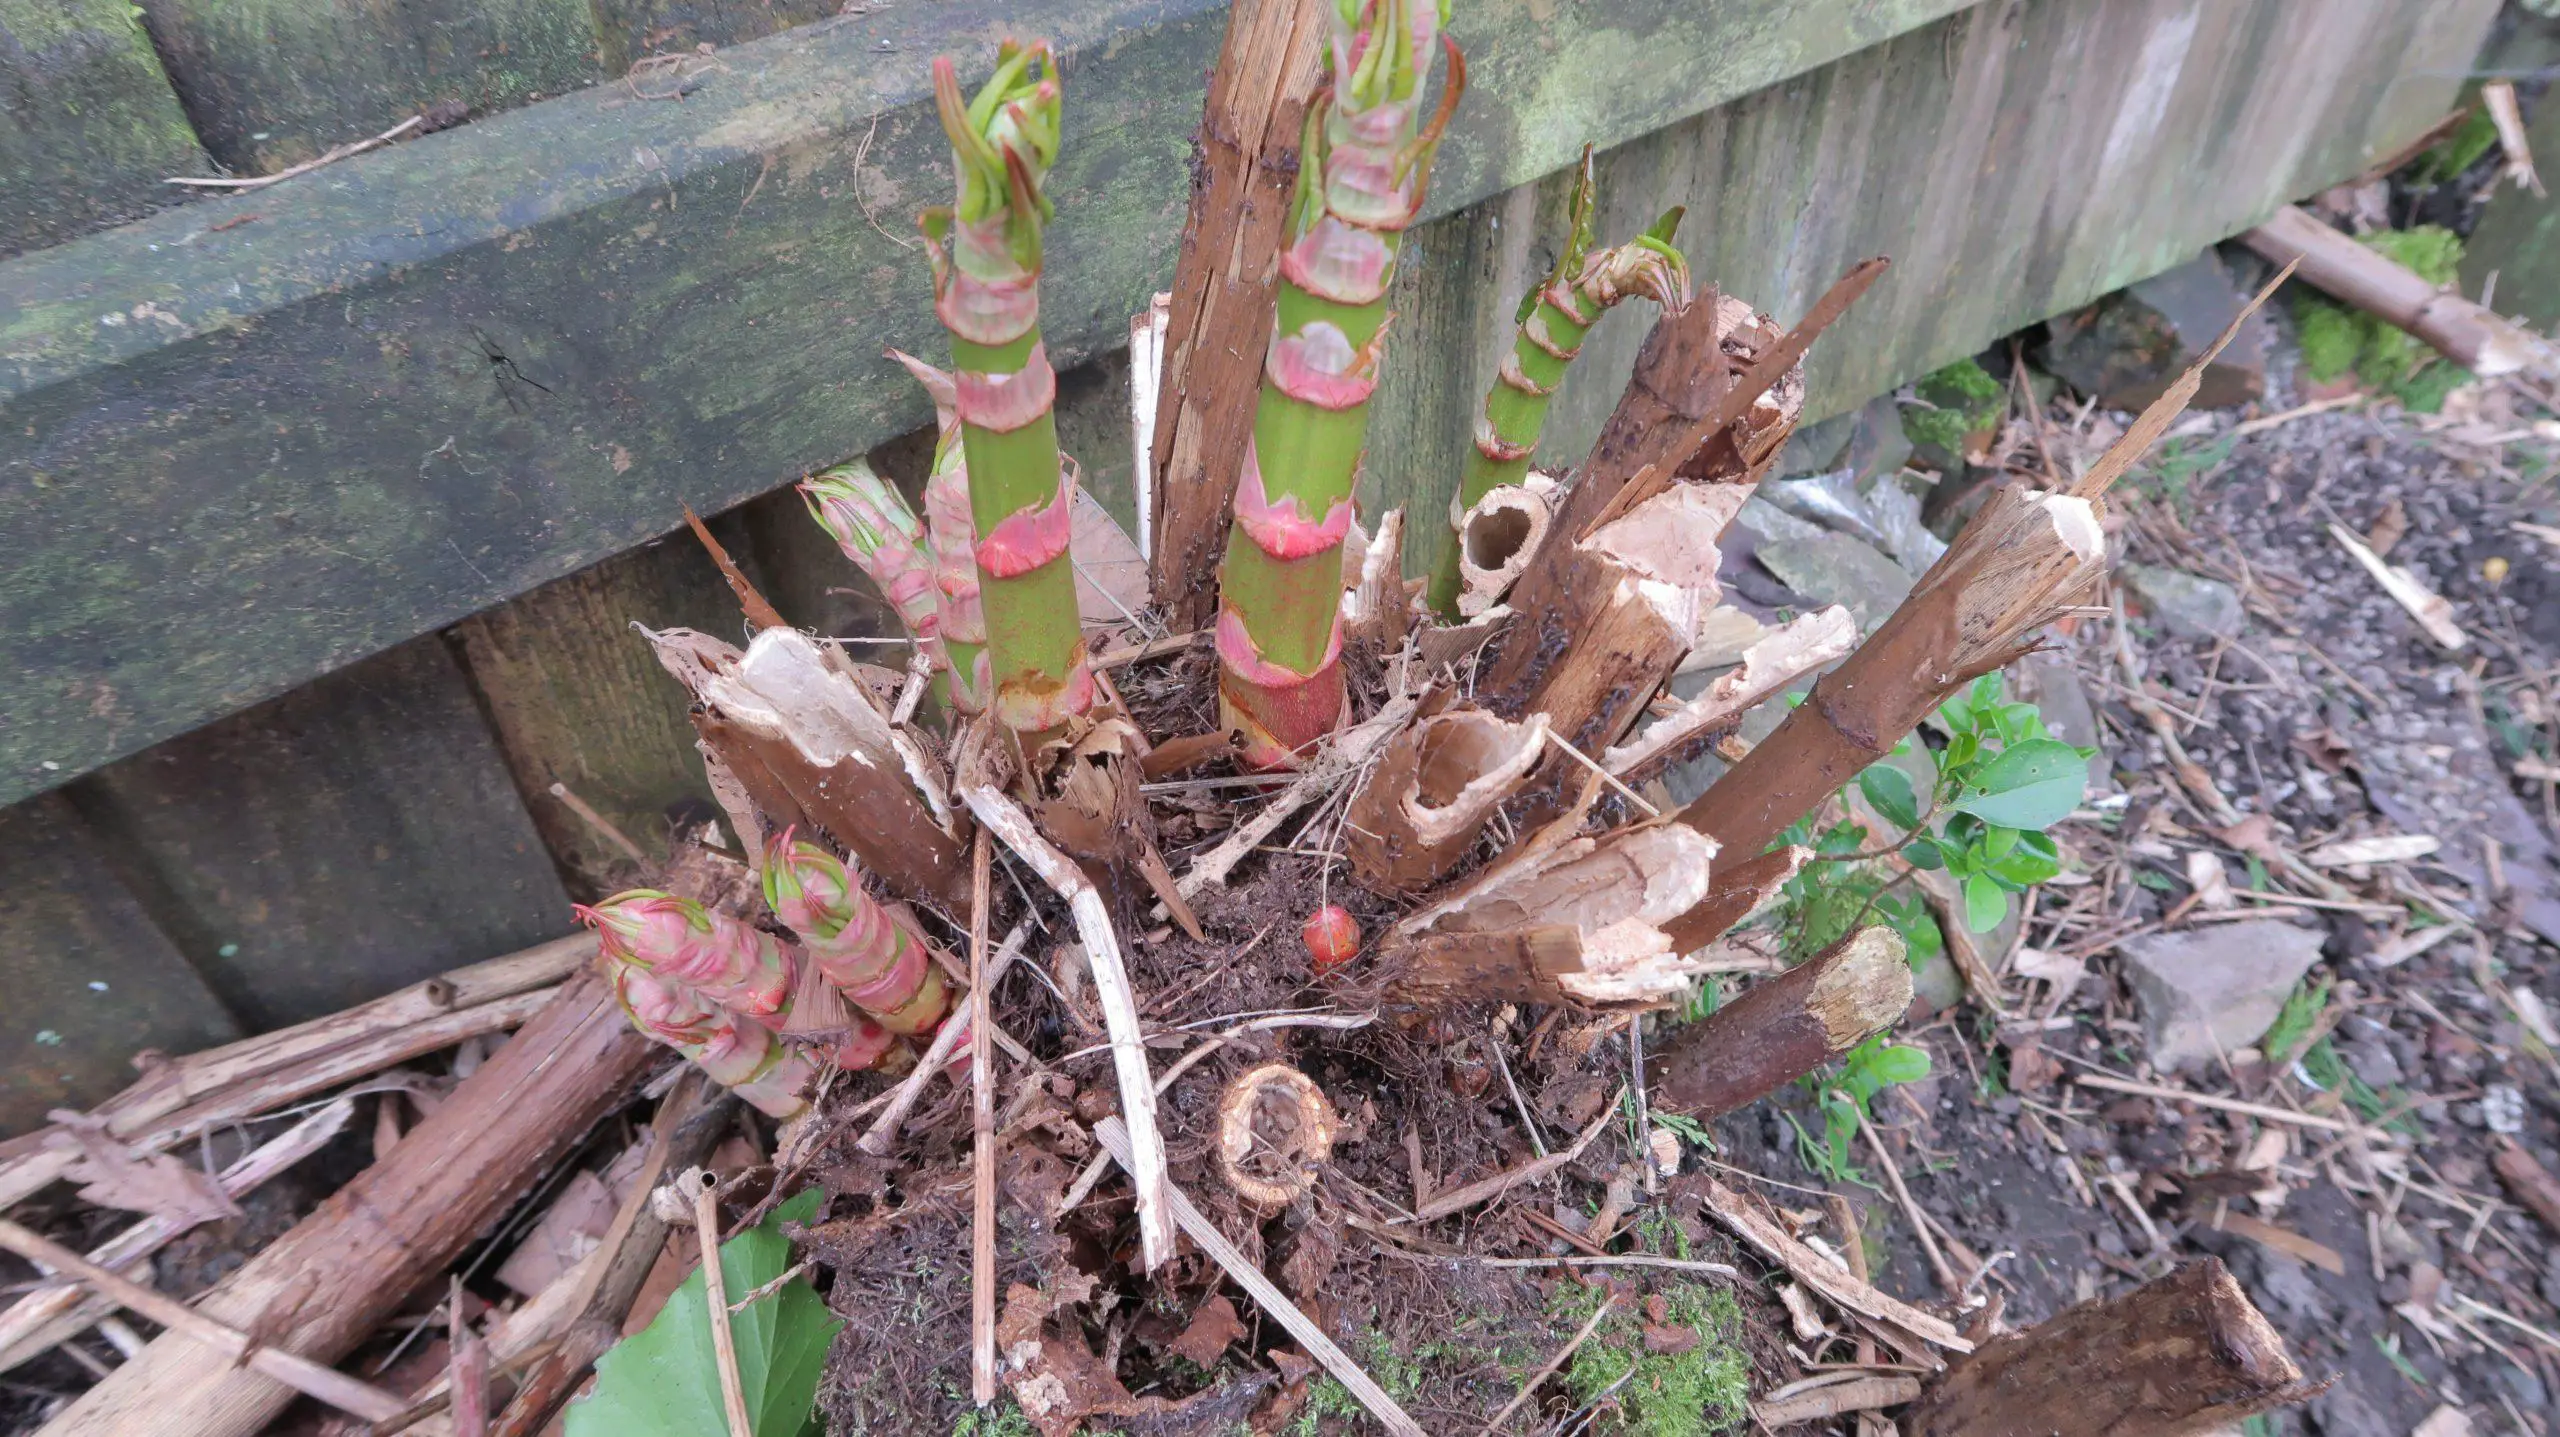 Japanese knotweed growth can impair nutrient cycling and soil fertility within the vicinity of the crown